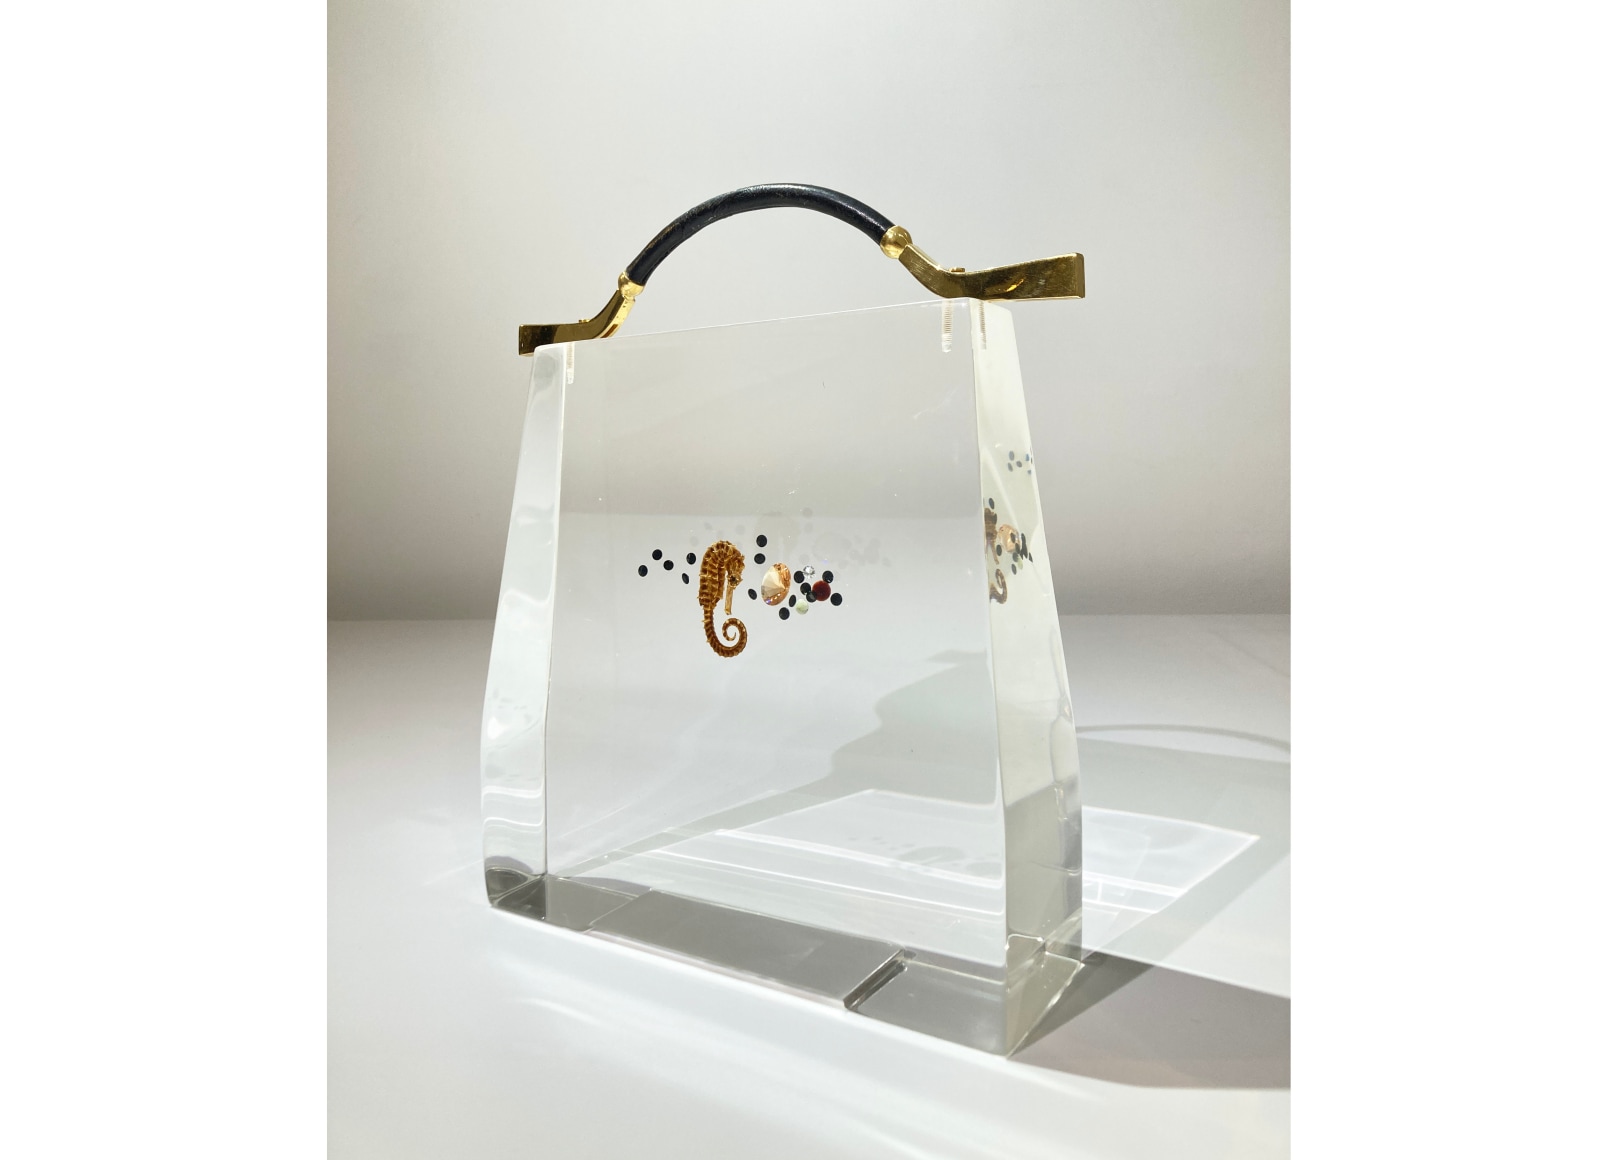 Ted Noten - Artists - Ornamentum Gallery, contemporary jewelry